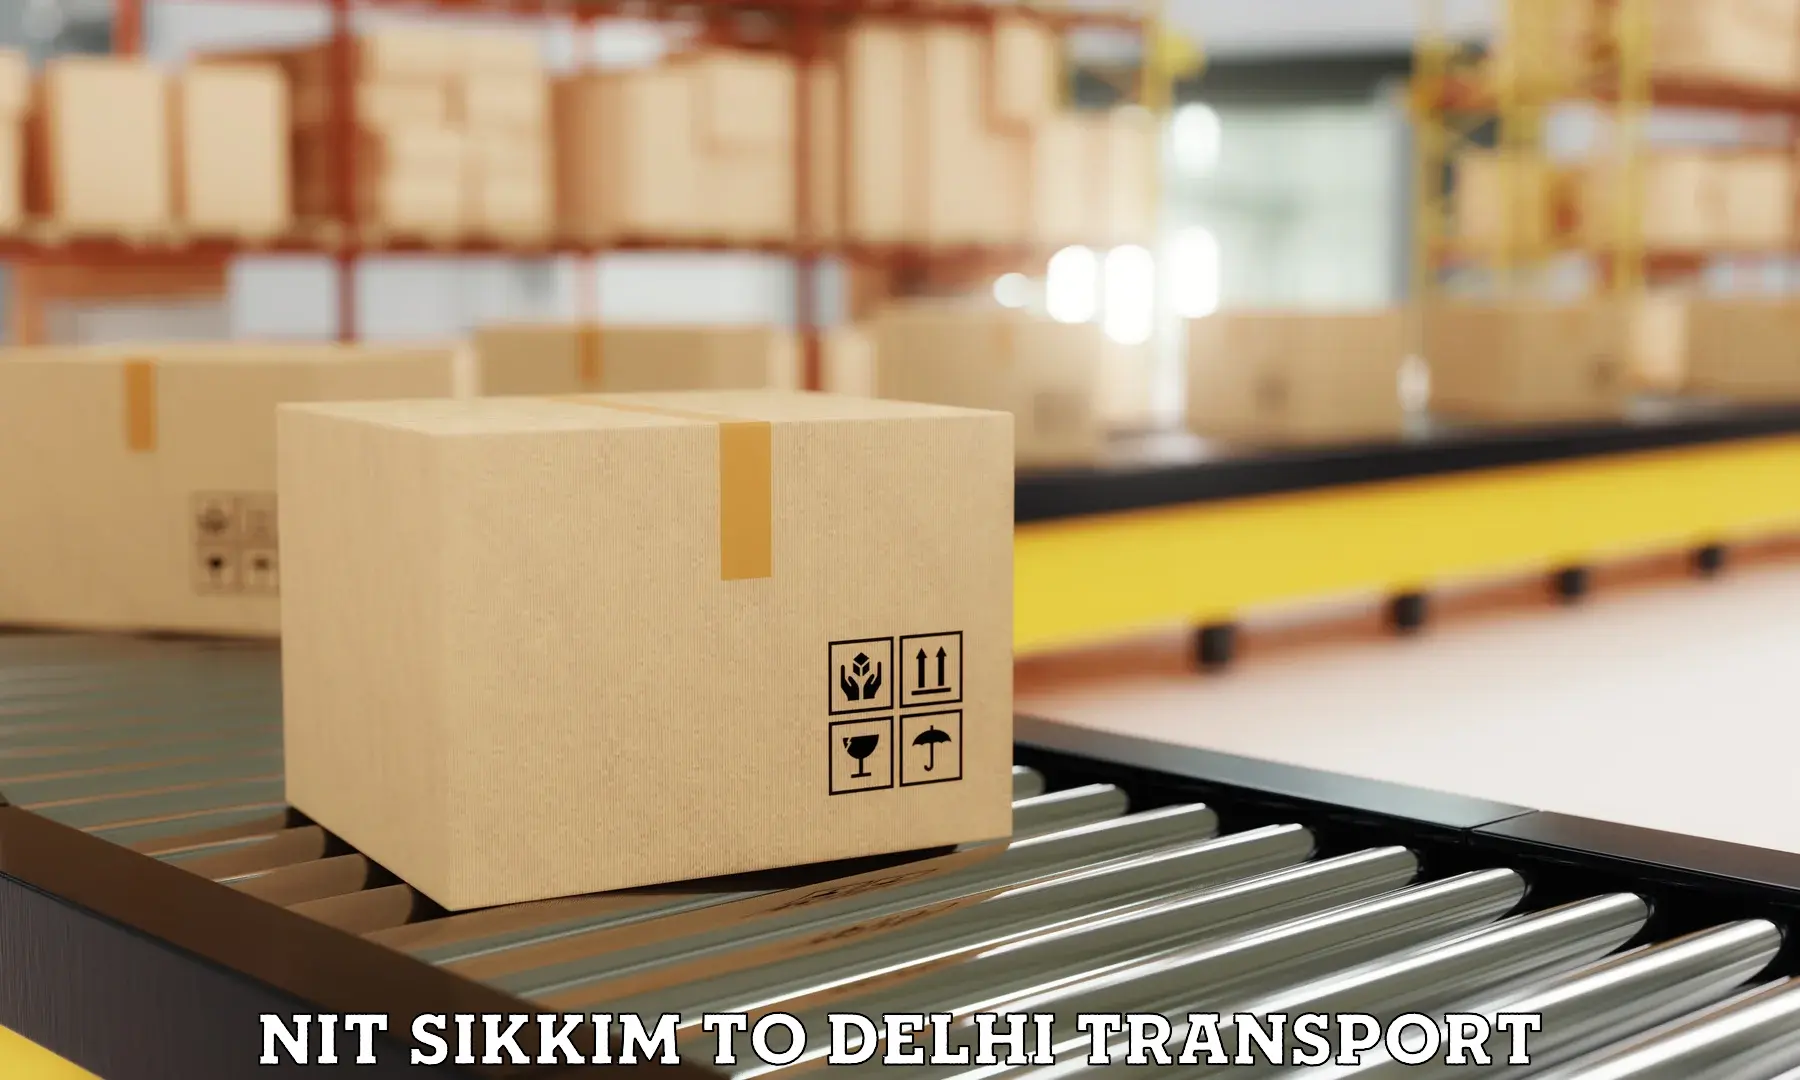 Container transport service NIT Sikkim to NIT Delhi